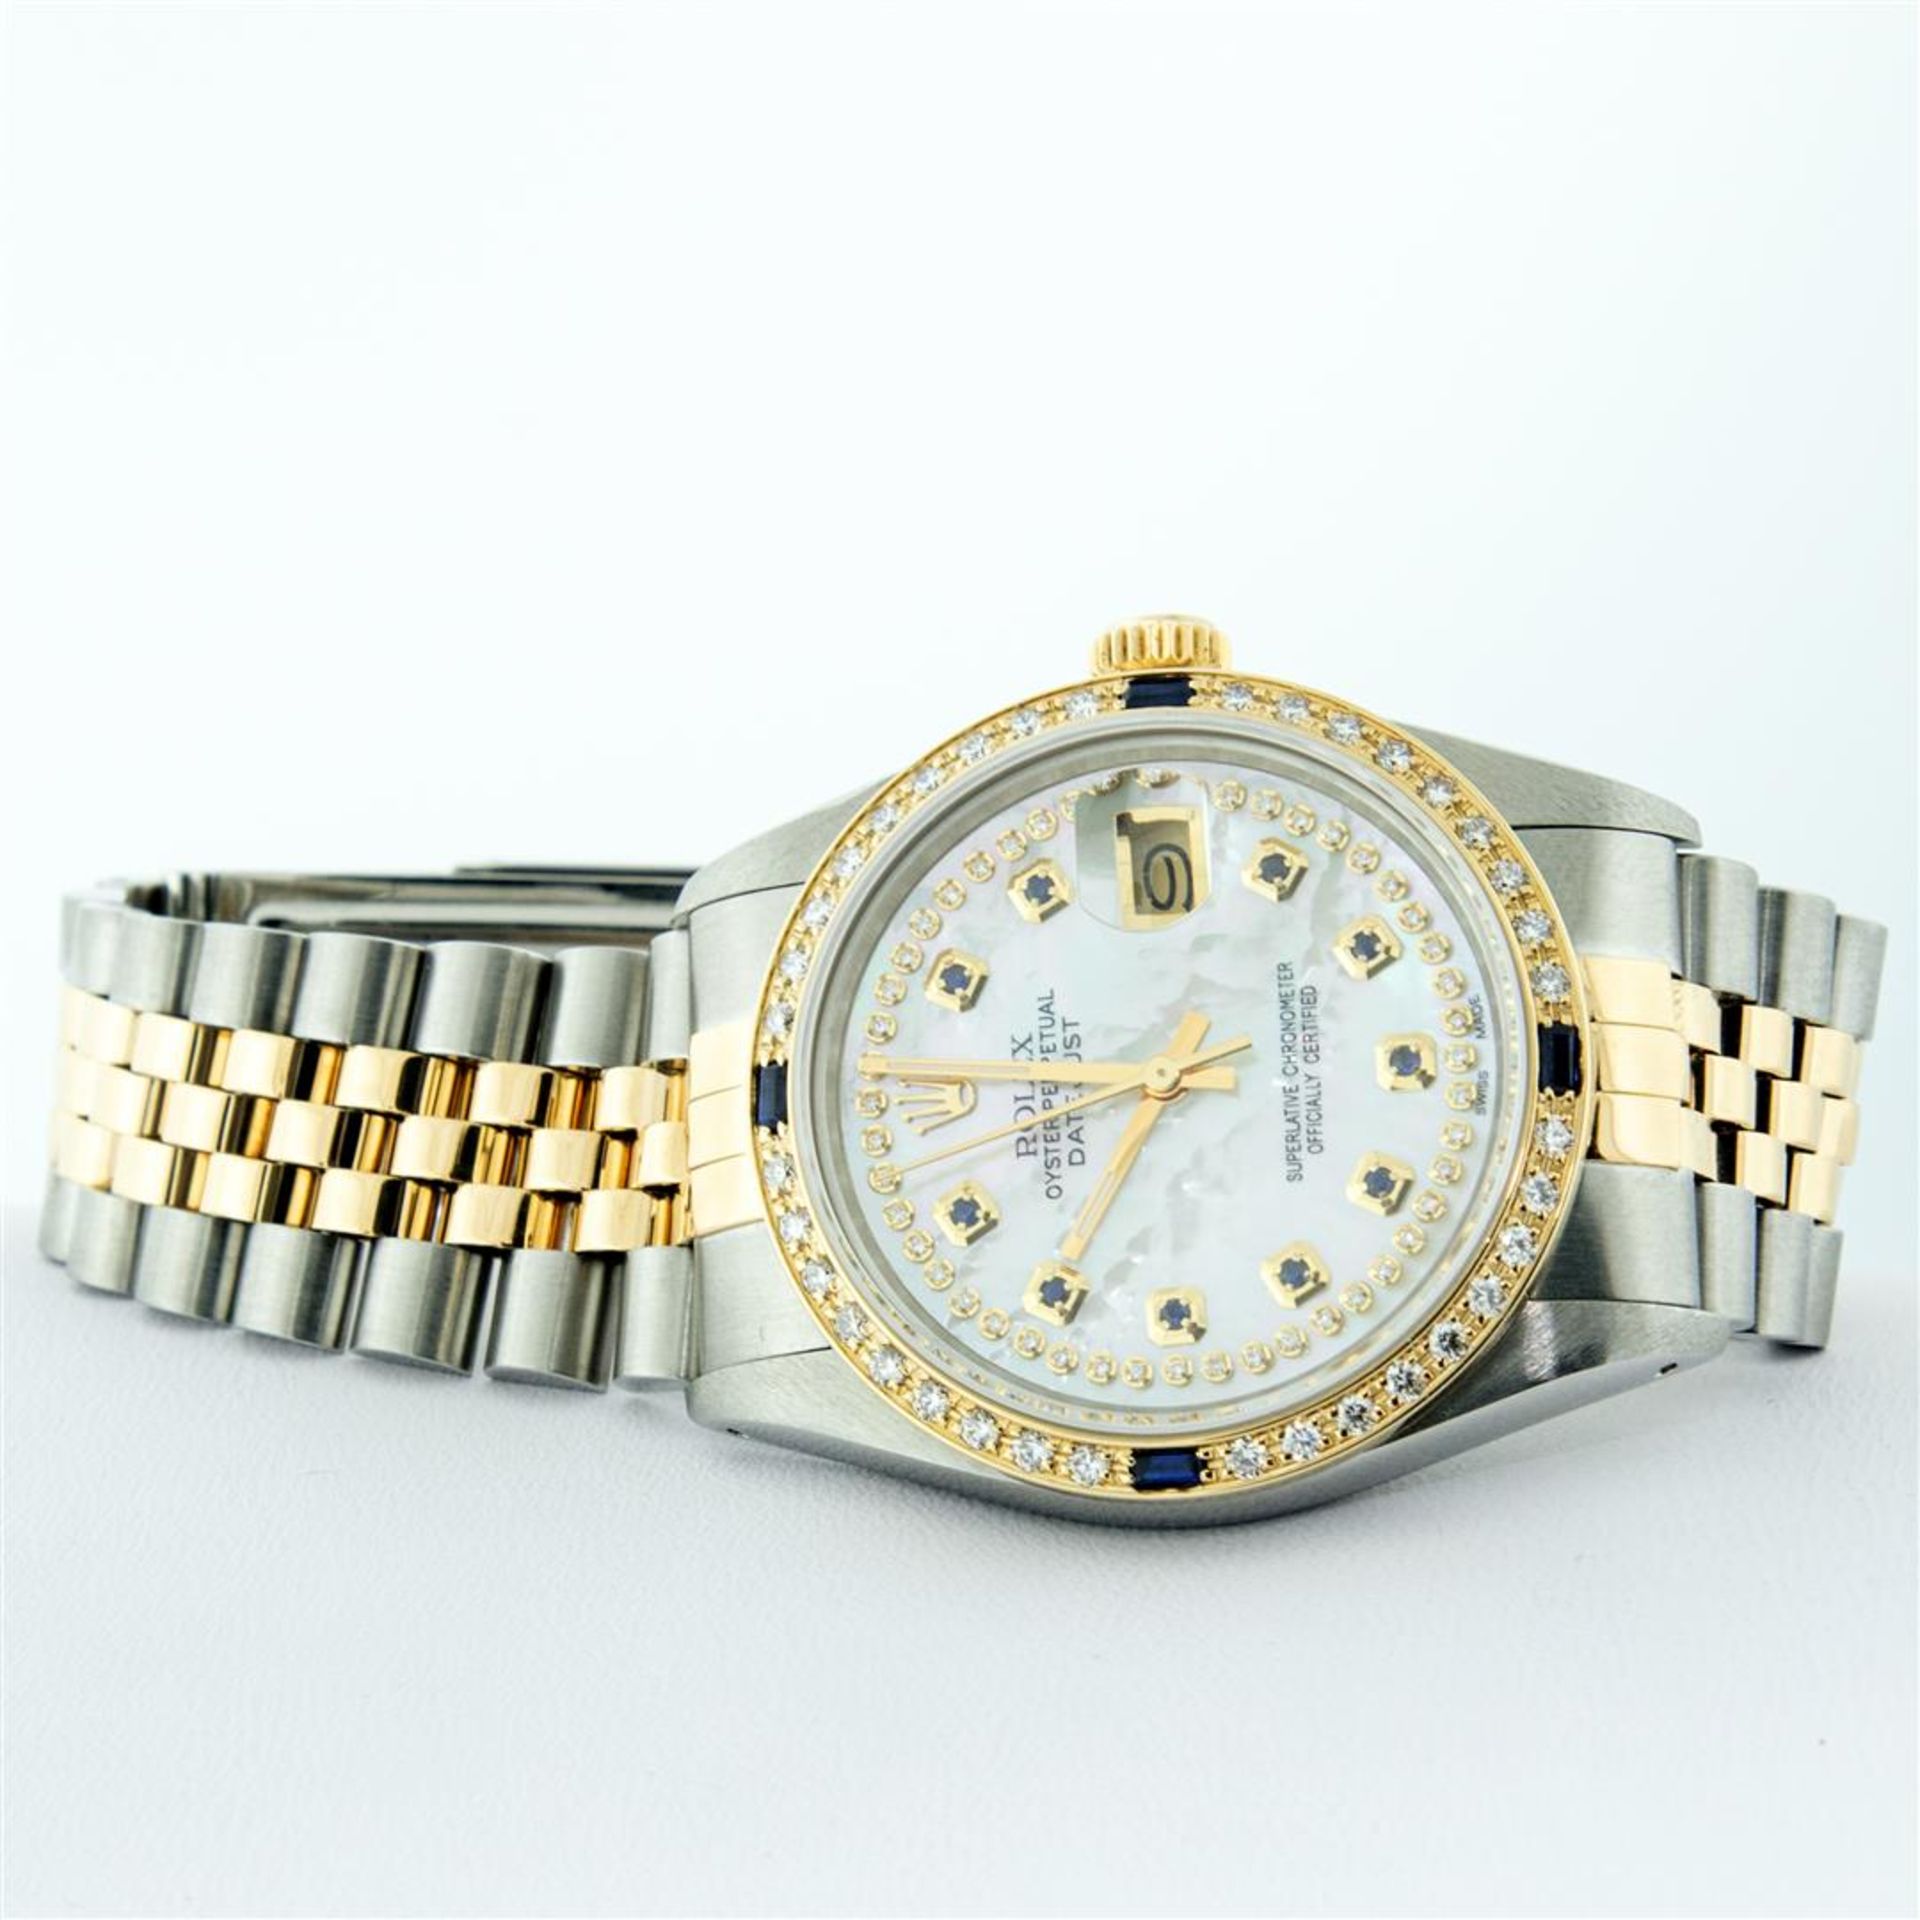 Rolex Mens 2 Tone Mother Of Pearl Diamond & Sapphire Datejust Wristwatch - Image 4 of 9